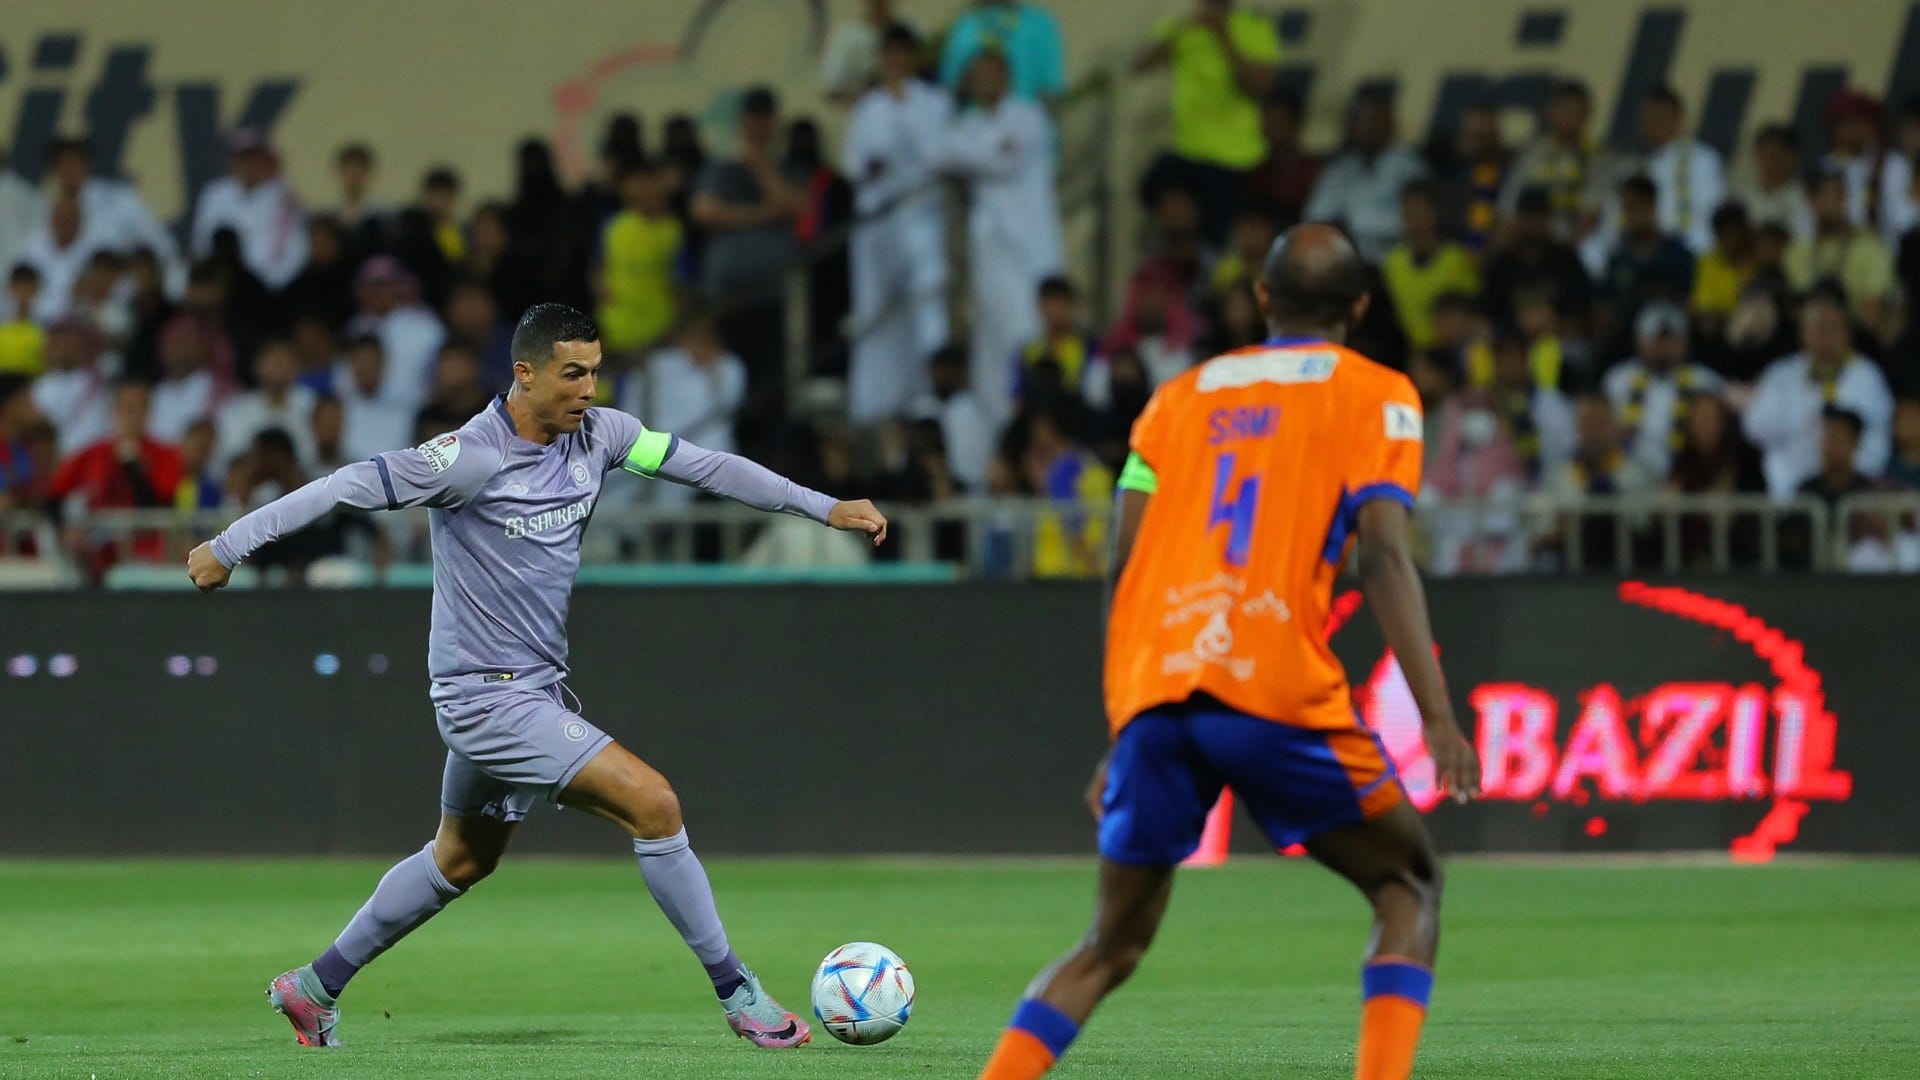 Al-Hilal vs Al-Nassr Where to watch the match online, live stream, TV channels and kick-off time Goal